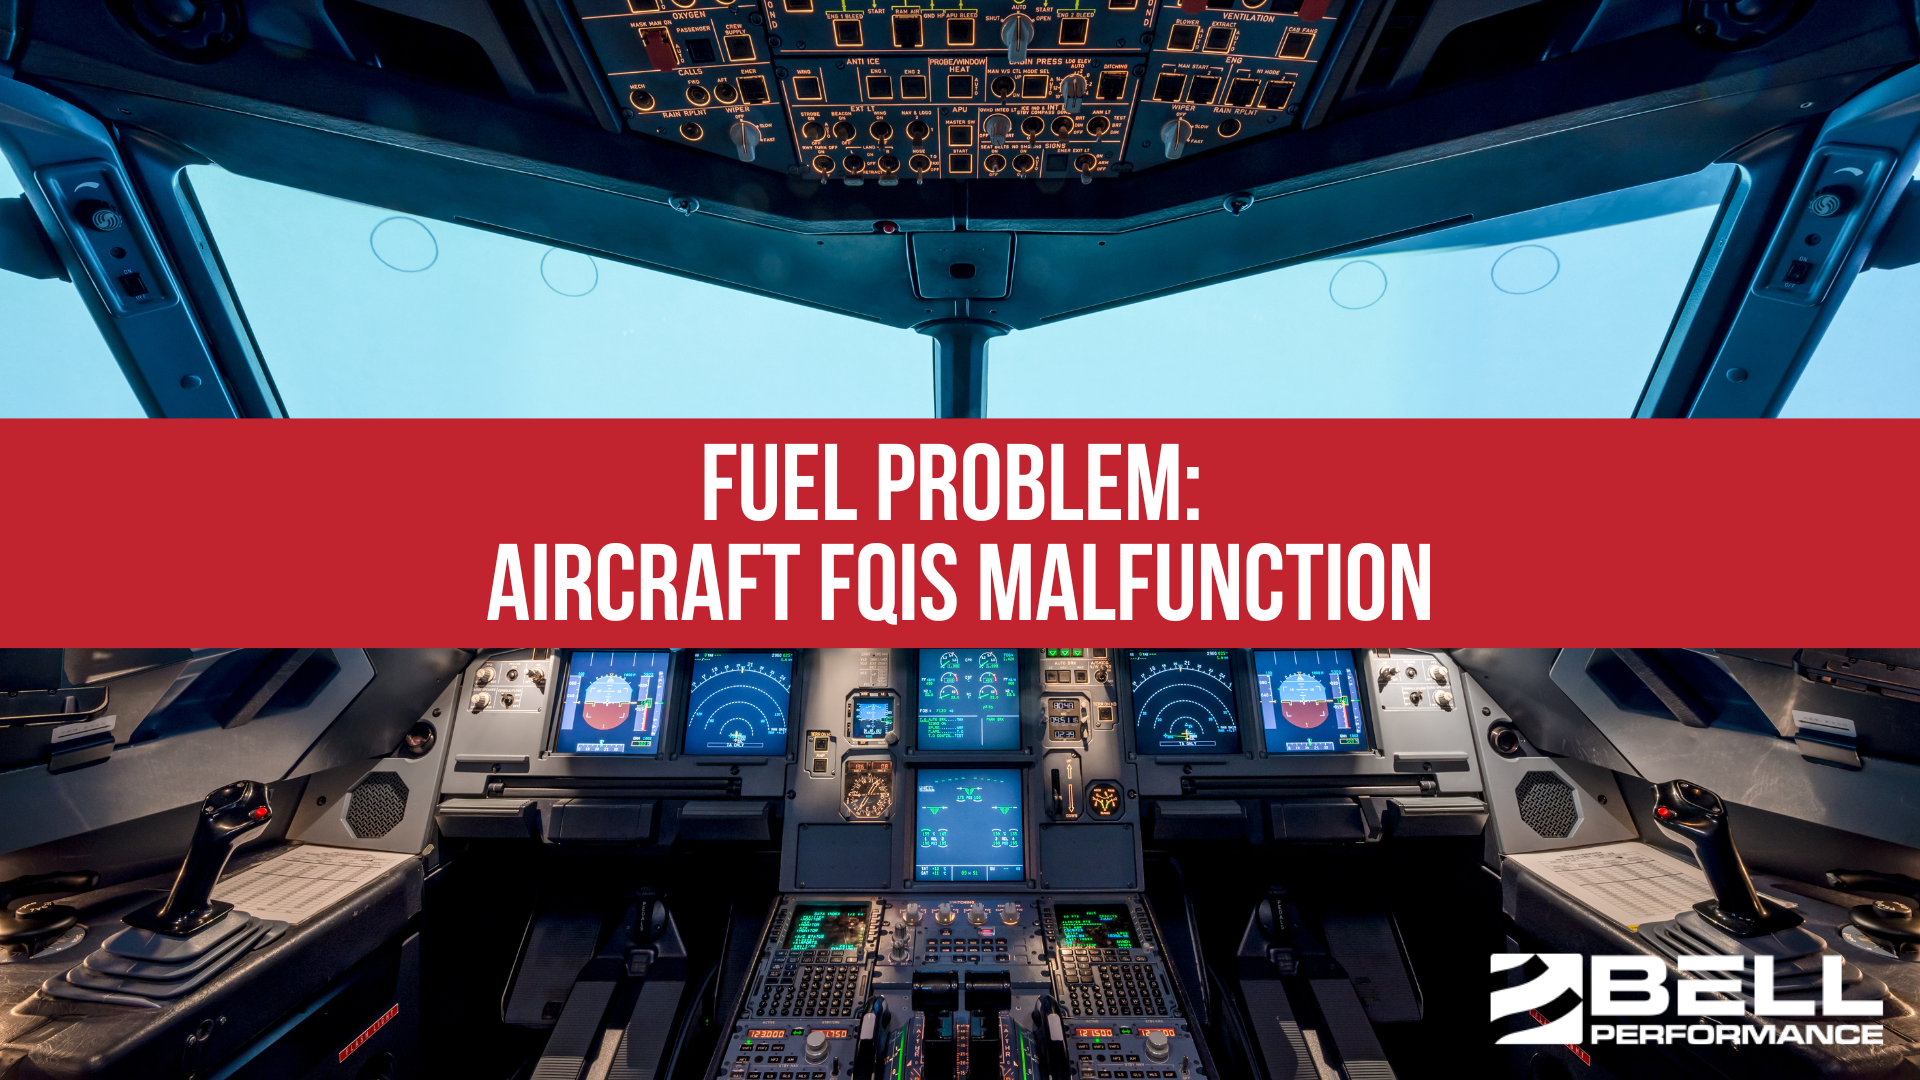 Fuel Problem: Aircraft FQIS Malfunction